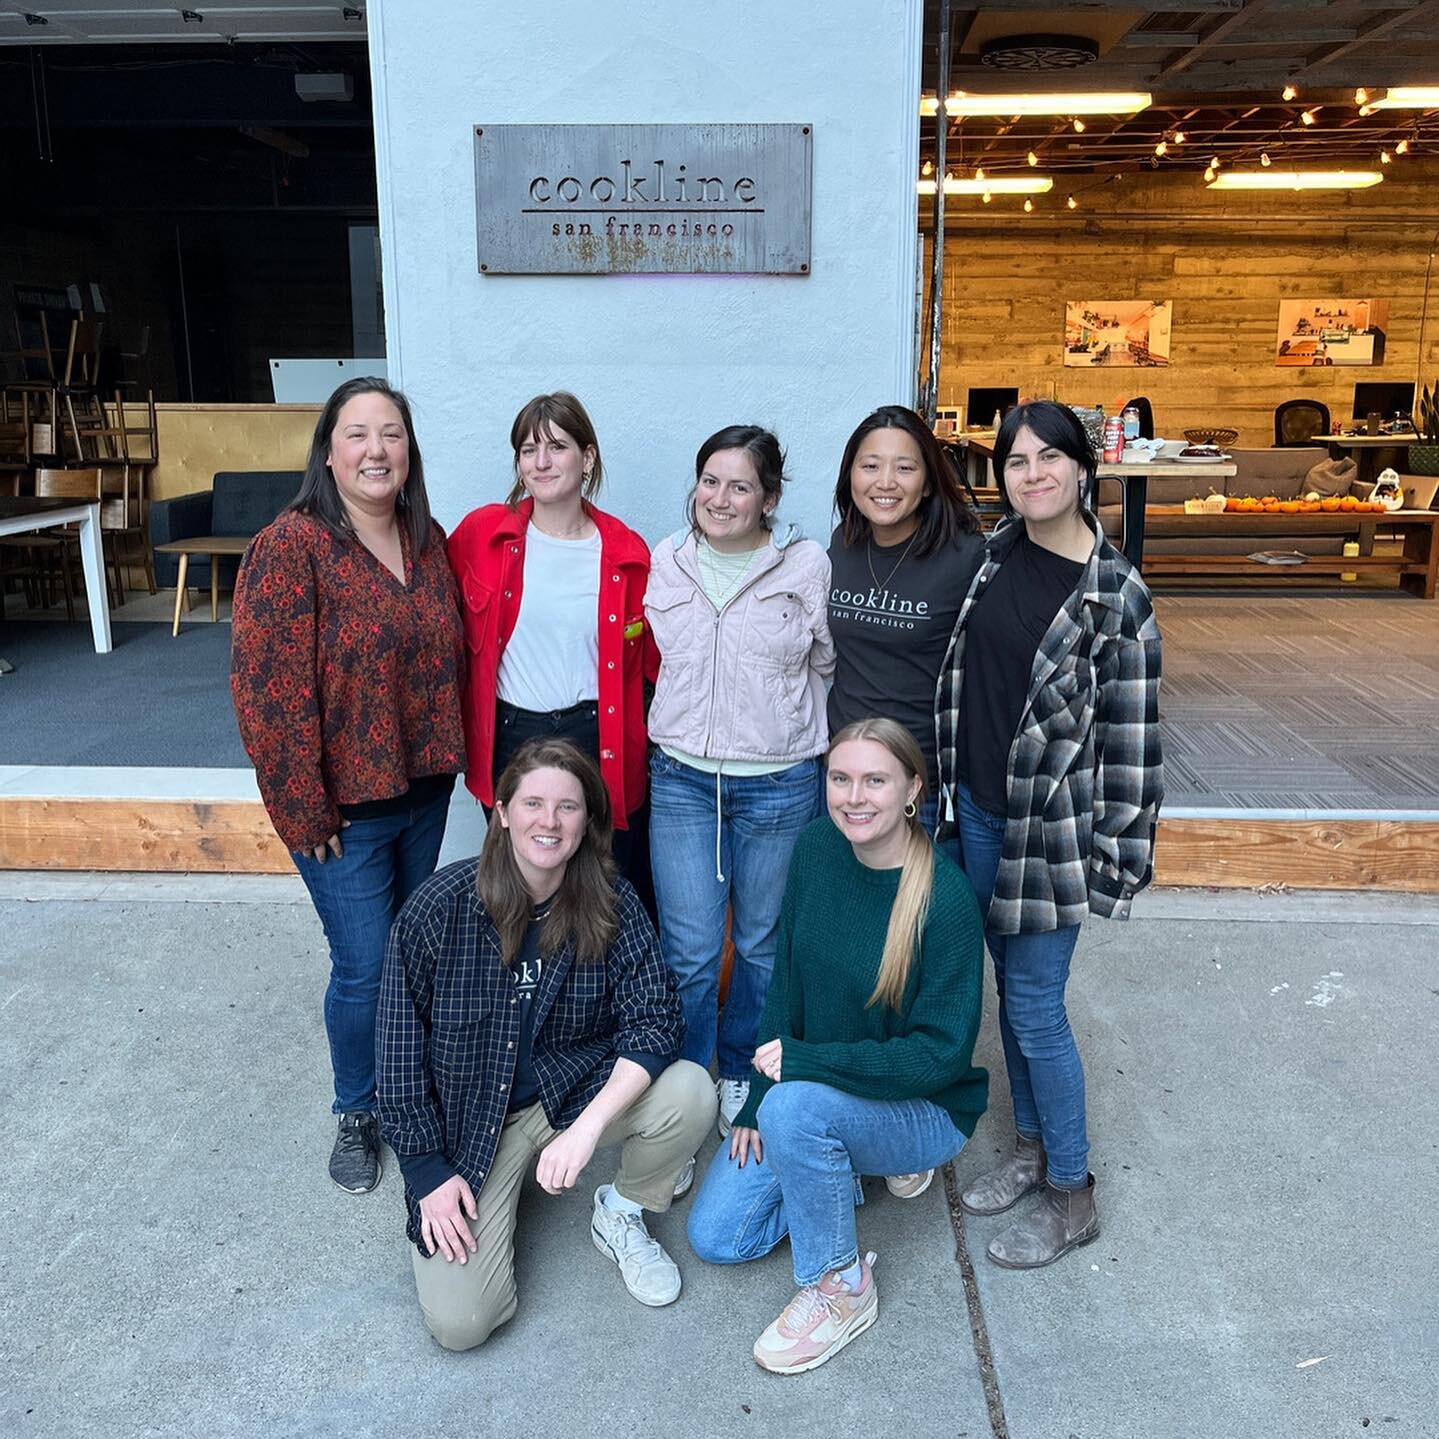 It&rsquo;s Women&rsquo;s History Month, AND this week is officially Women in Construction Week! 🎉🙋🏻&zwj;♀️👩🏼&zwj;💻👷🏻&zwj;♀️🧑🏻&zwj;💼👩&zwj;🔧🙋🏼&zwj;♀️🎉
⠀⠀⠀⠀⠀⠀⠀⠀⠀
We @cooklinesf are SO proud to have broken the old dusty mold of a male-dom